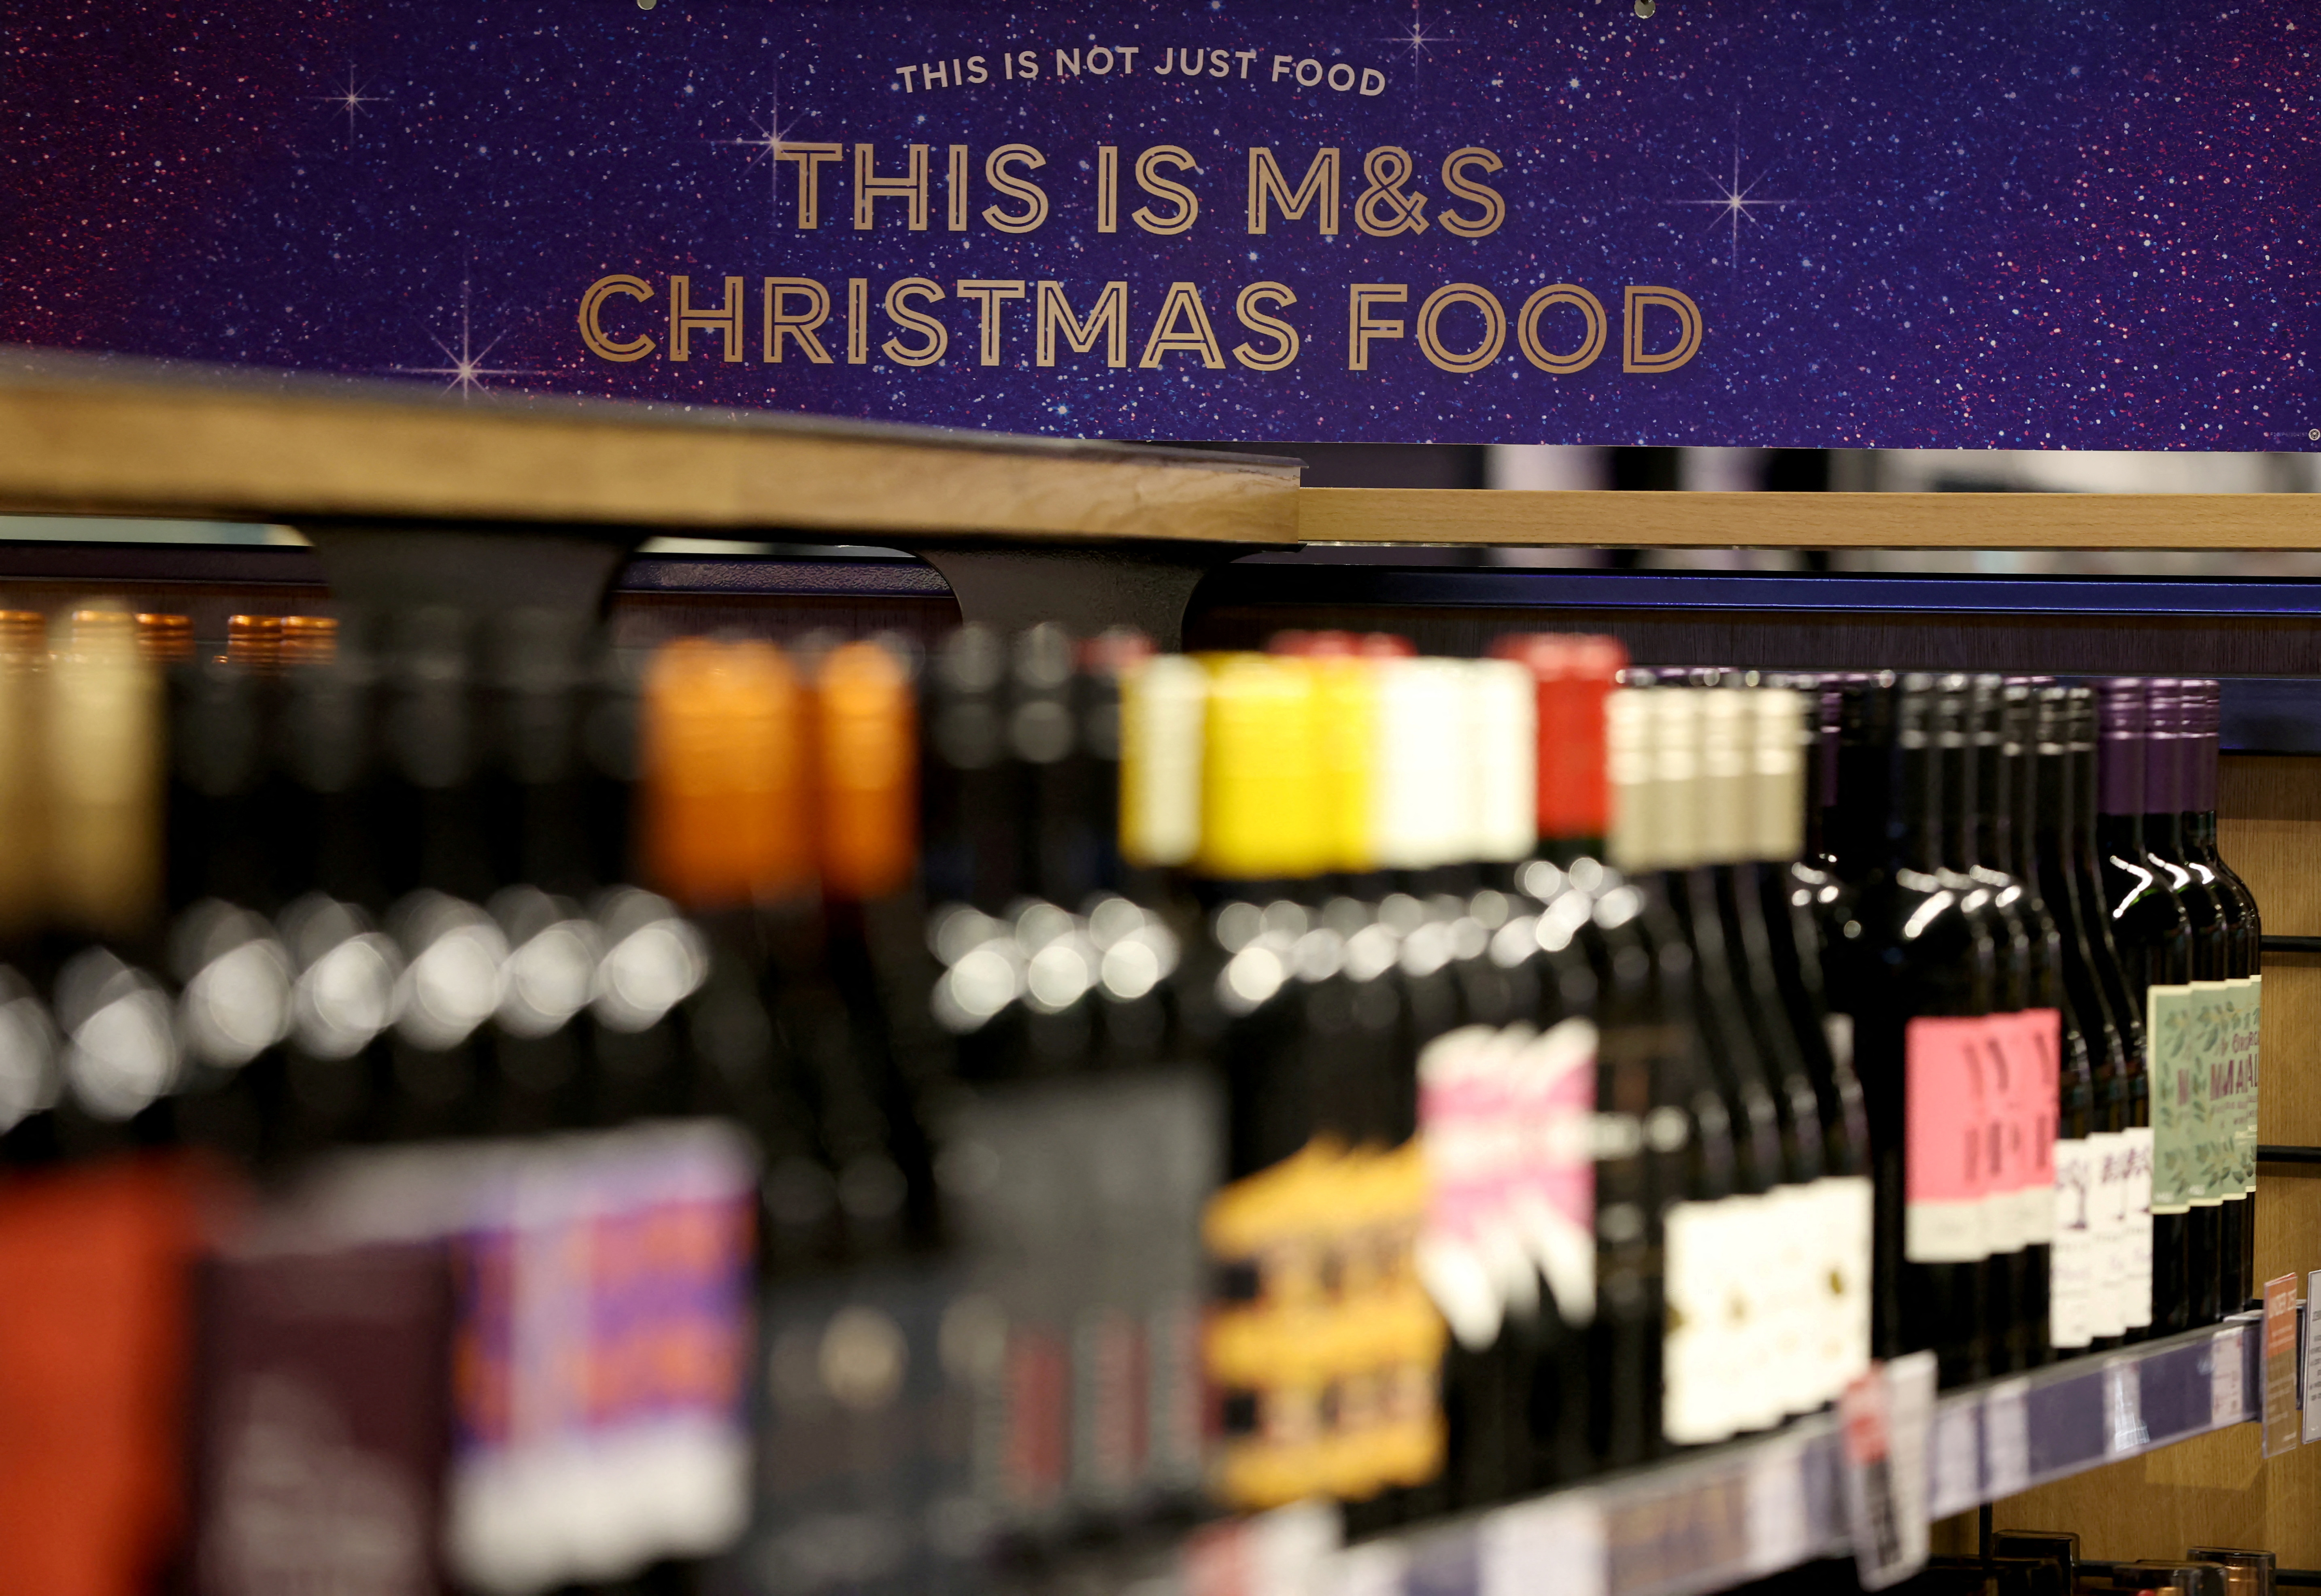 UK's M&S Christmas food sales growth topped only by Lidl